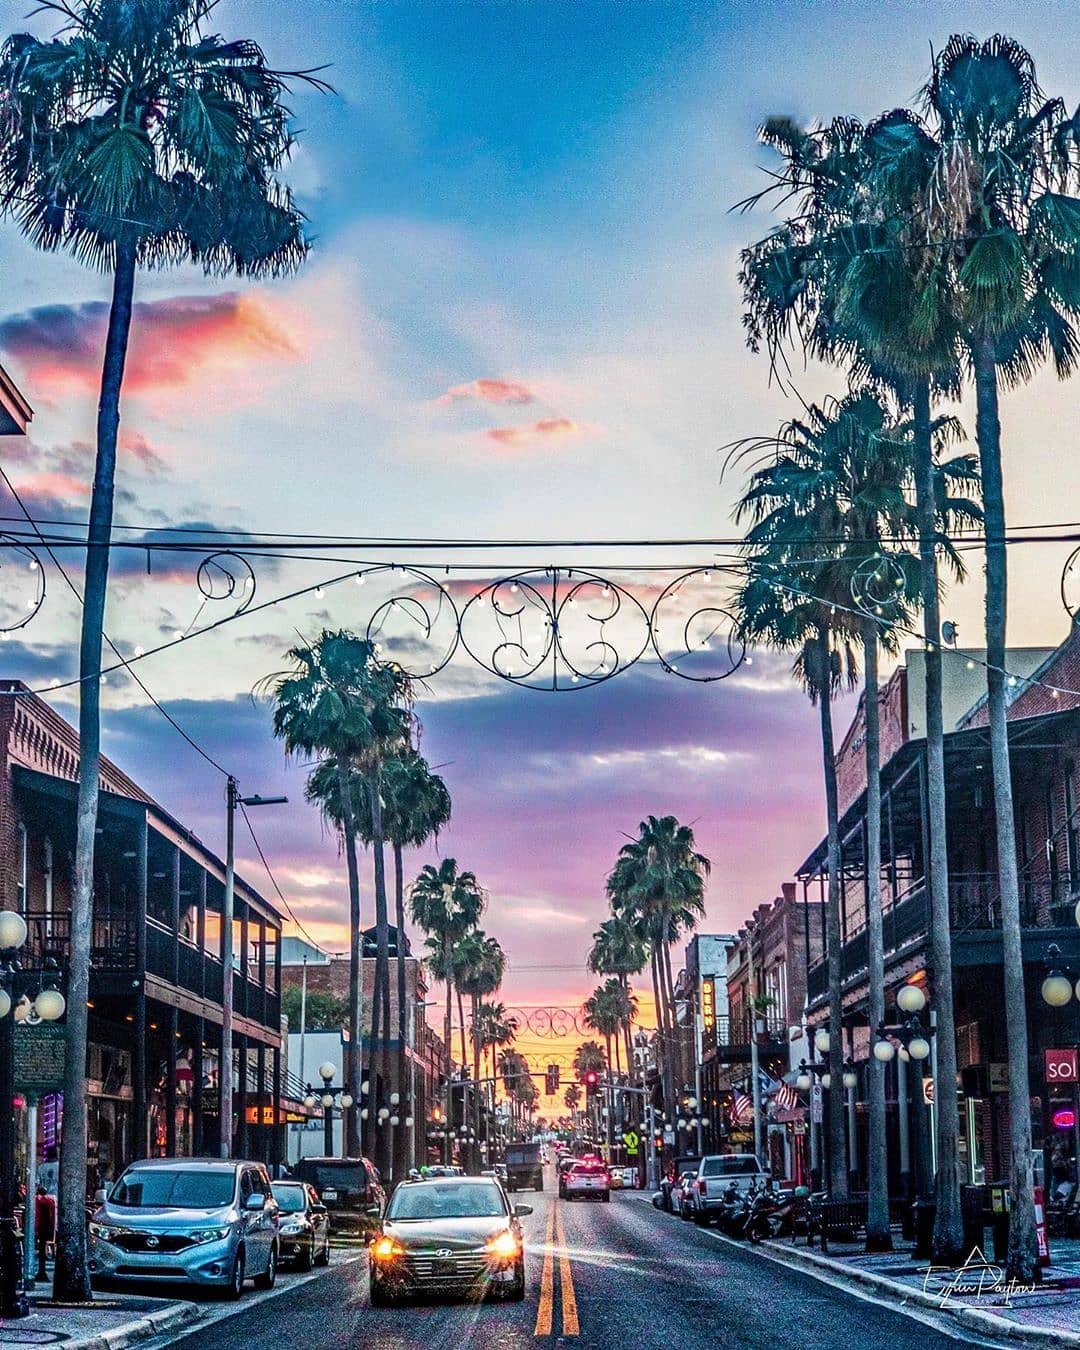 Street view of Ybor City with purple skies as the sun sets. Photo by Instagram user @erinpaytonphotography